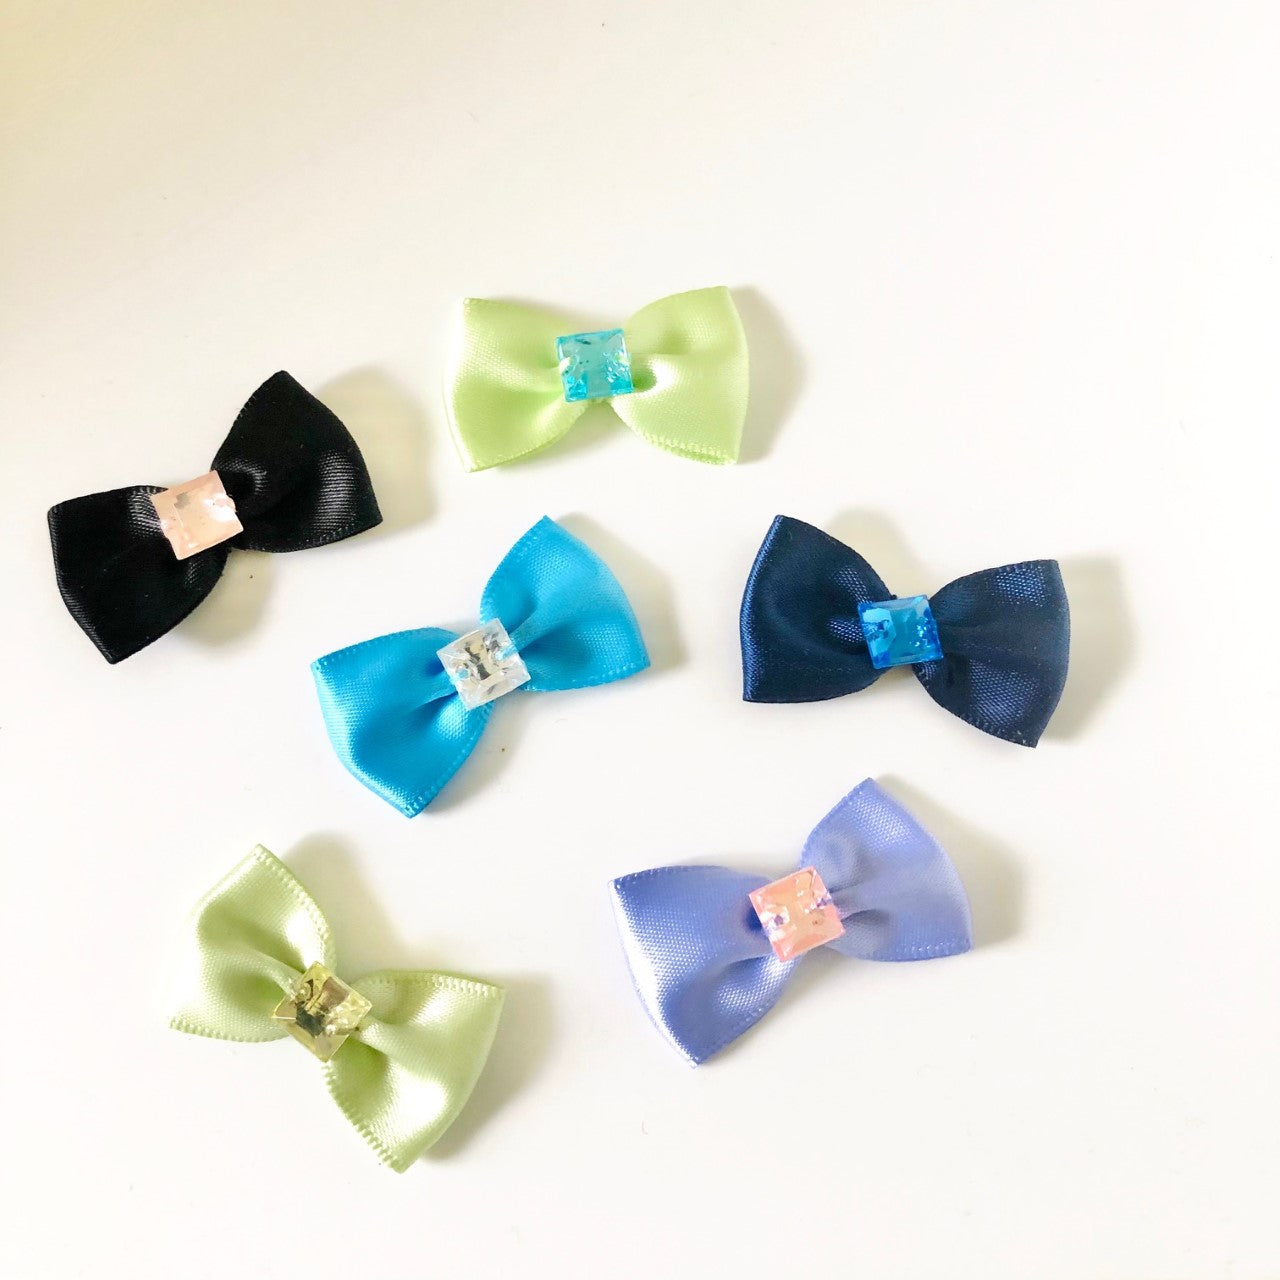 Single square Gemstones of different colors on satin bows in several colors